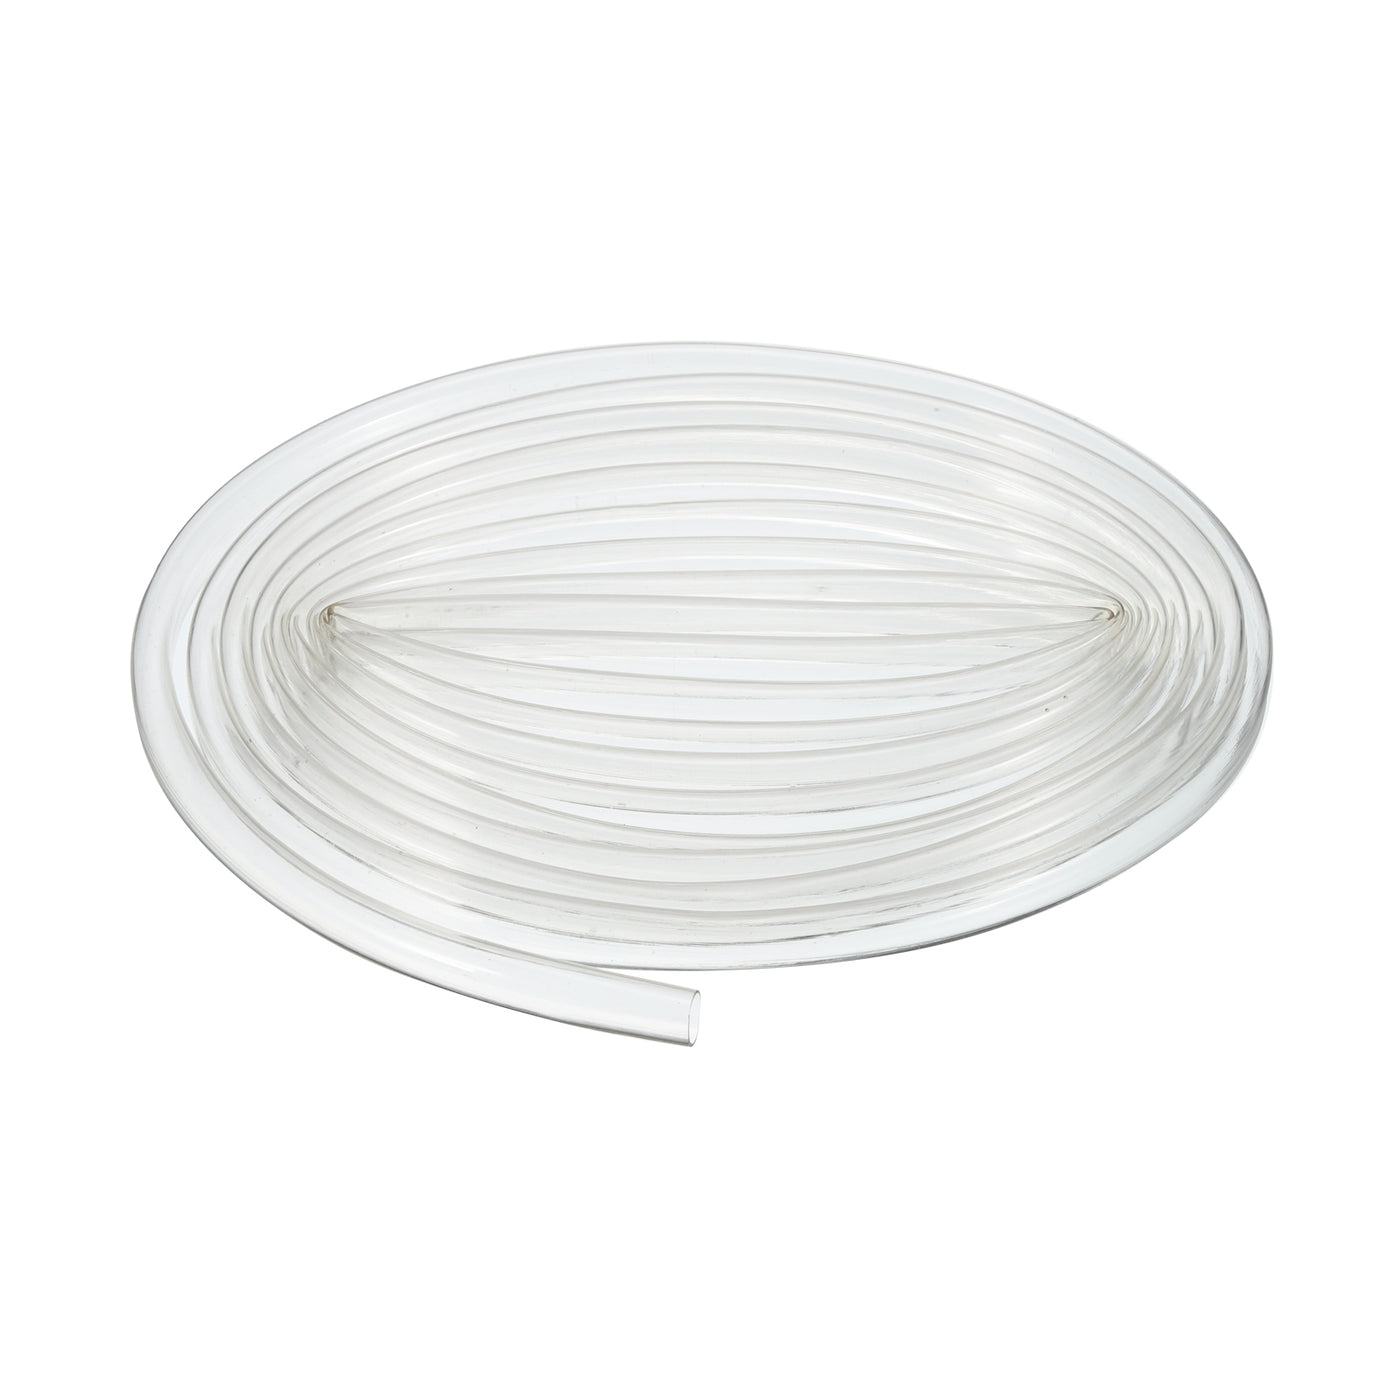 uxcell Uxcell Clear PVC Tube Wire Harness Tubing, 5/16-inch(8mm) ID 10ft Sleeve for Wire Sheathing Wire Protection